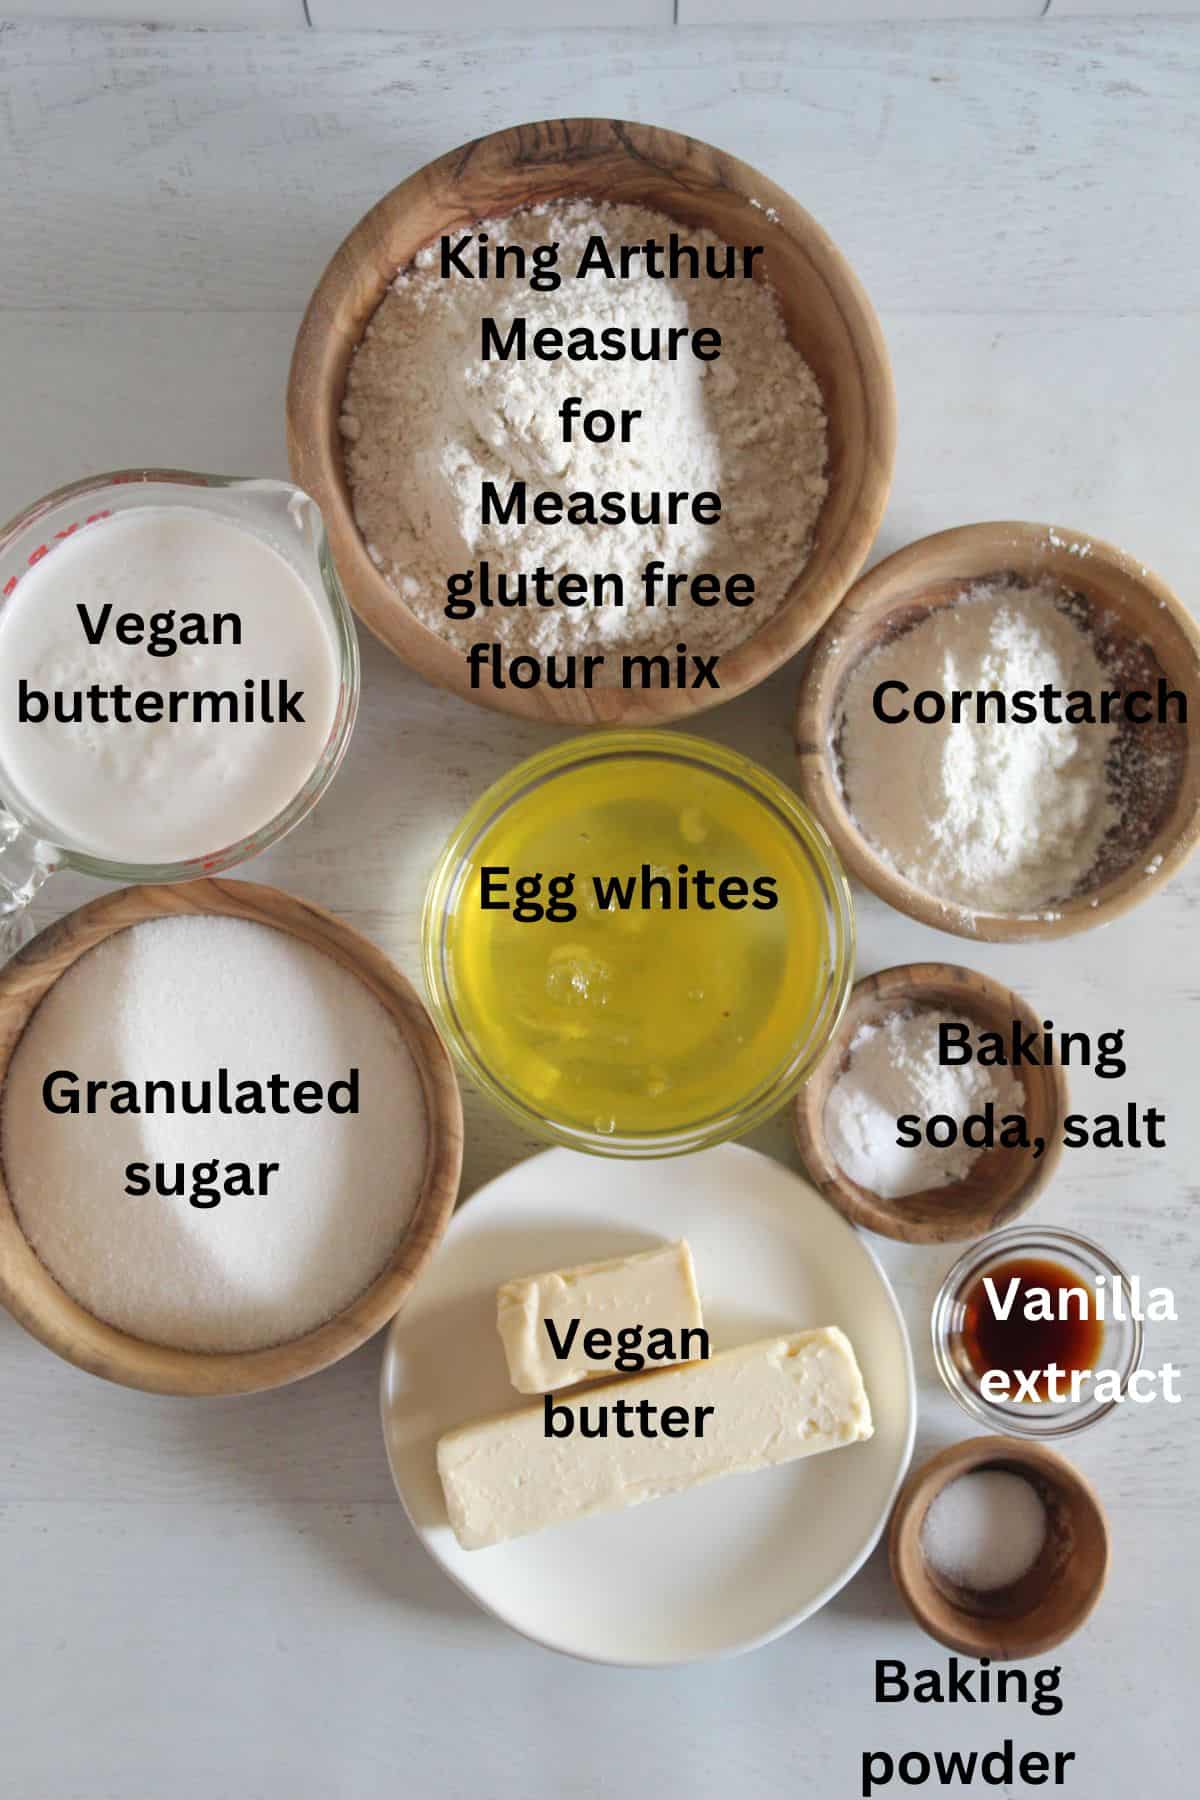 specific ingredients to make a white cake without gluten.